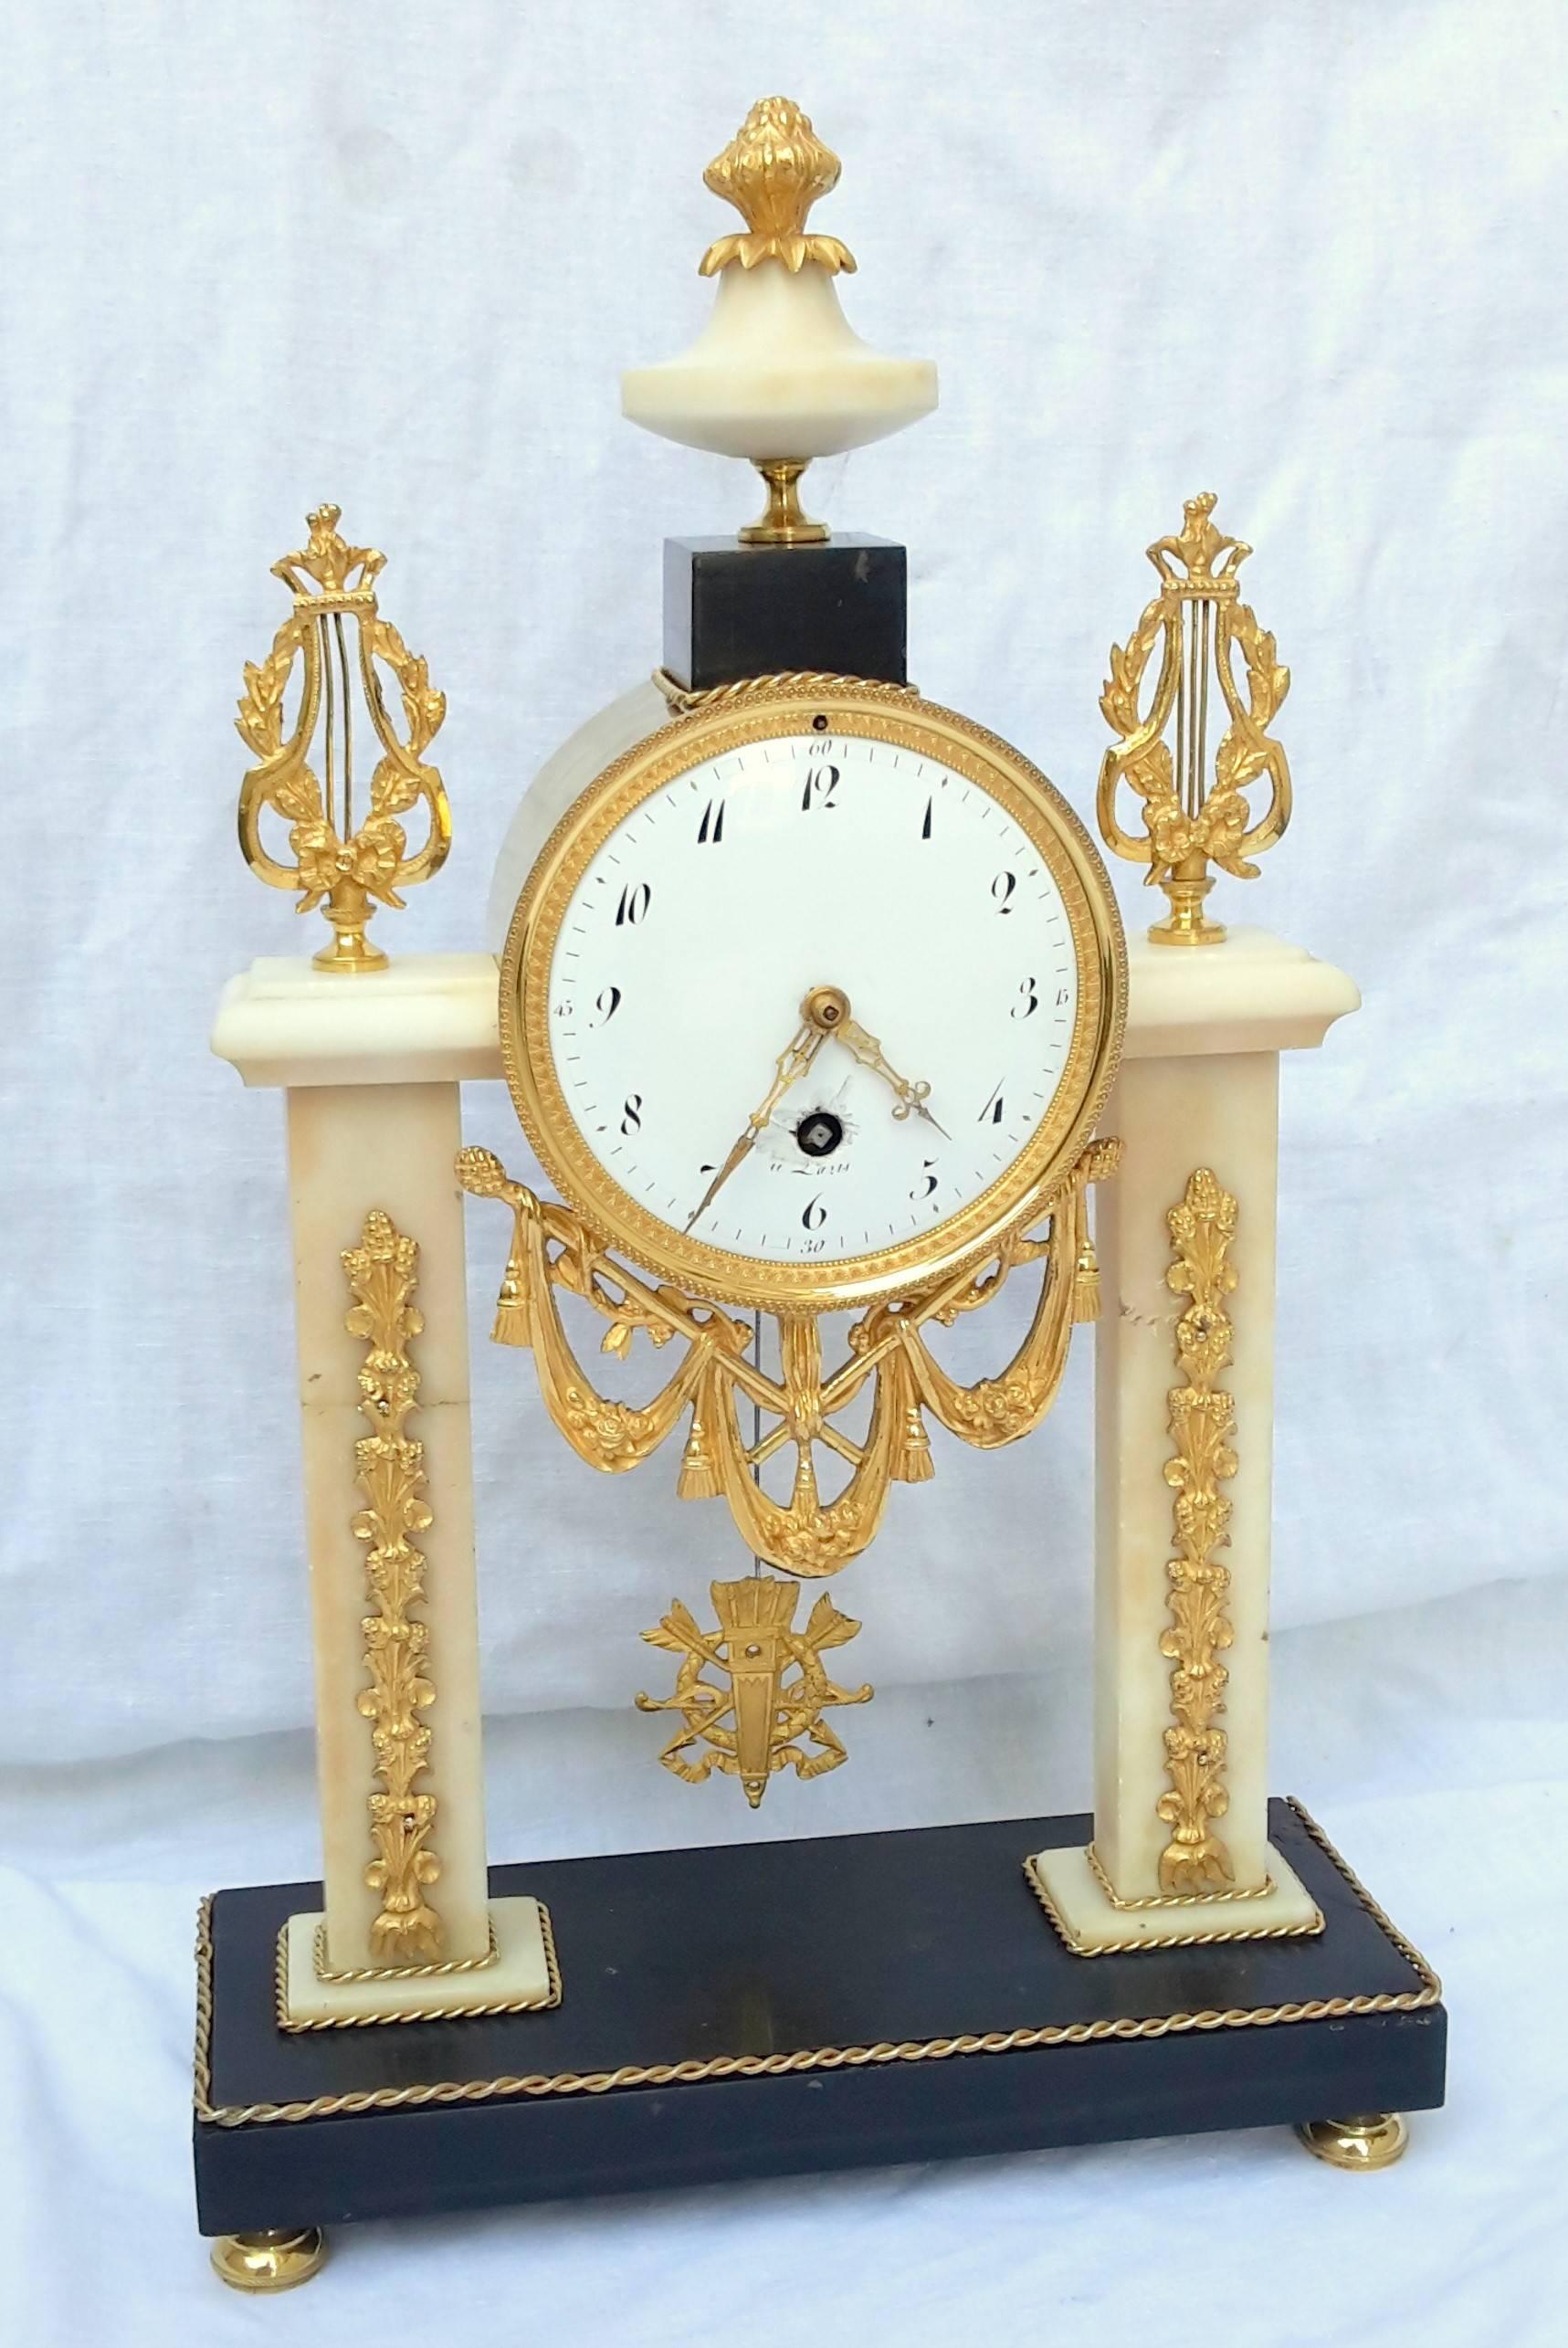 French Louis XVI style pendulum clock in carrara and Soignies marbles, with beautiful gilt bronze garnitures golden with mercury posed gold.

This clock had a restoration on a crack at the left column and at its base and its damaged around the